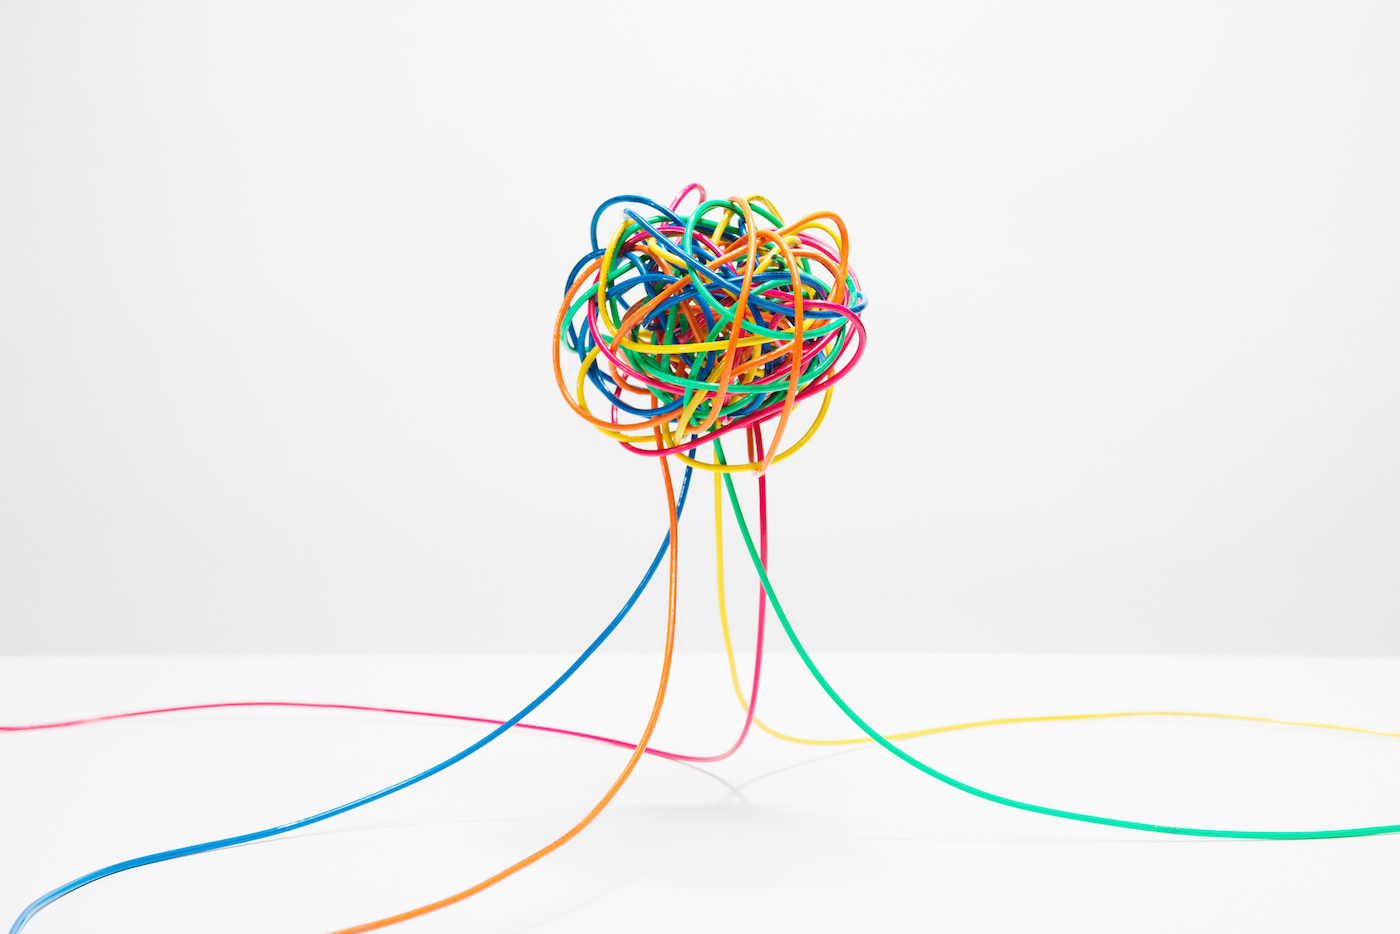 Different colored wires coming together to create a ball in mid air on white background